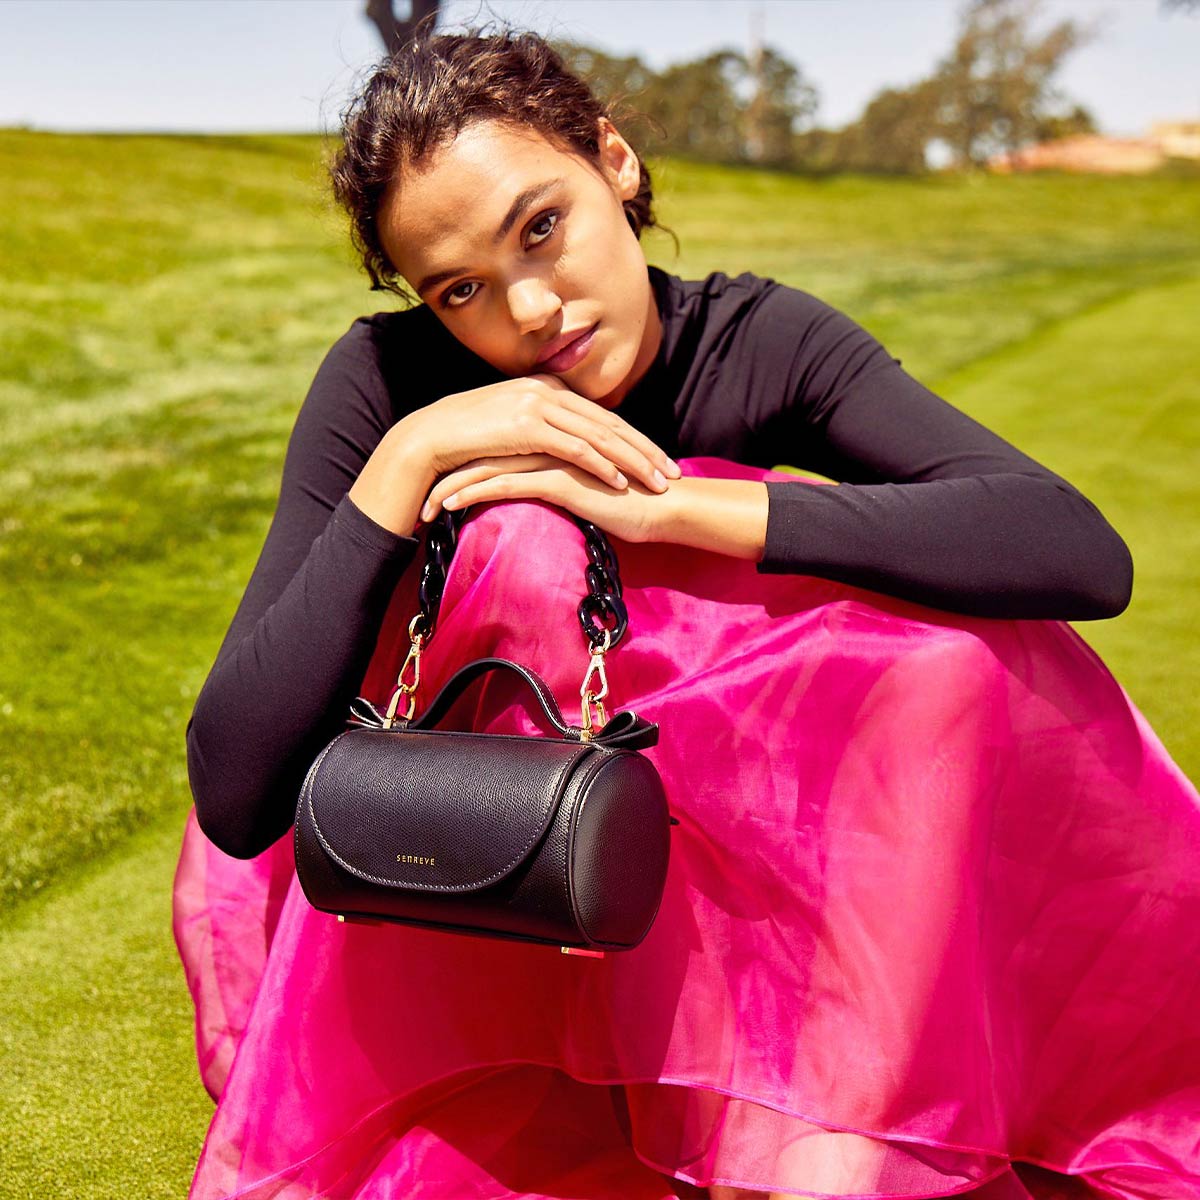 Model with Light Brown Skin and Hair Pulled Into a Low Bun. The model is wearing a black turtleneck and a bright pink flowy and silky skirt. She has a Mini Barrel Bag Pebbled Noir, Flat Acetate Chain in Noir Attached propped upon her knee.